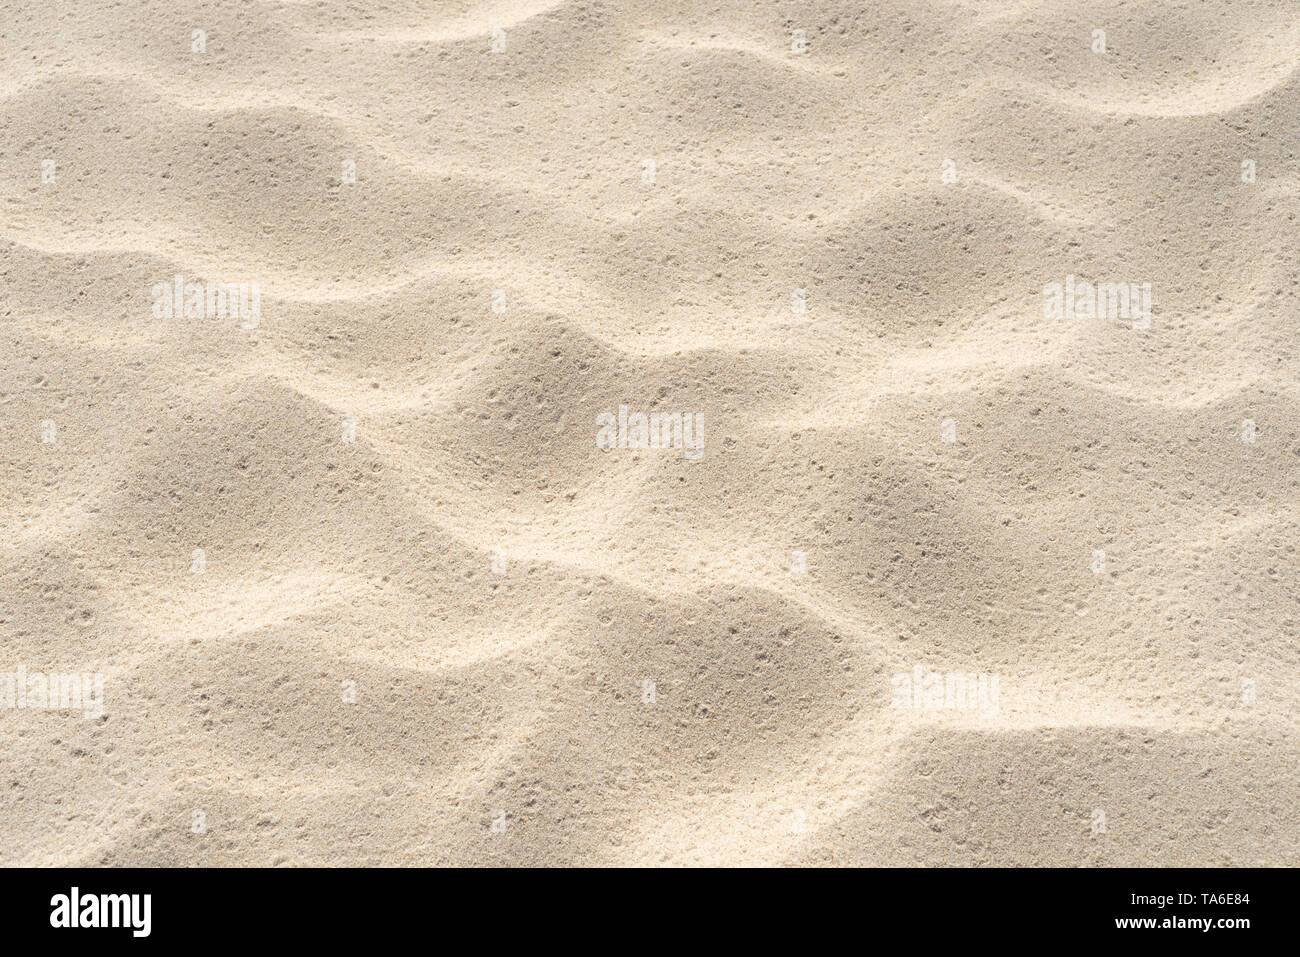 Abstract sand pattern. Summer background with sand texture on the beach by the sea Stock Photo